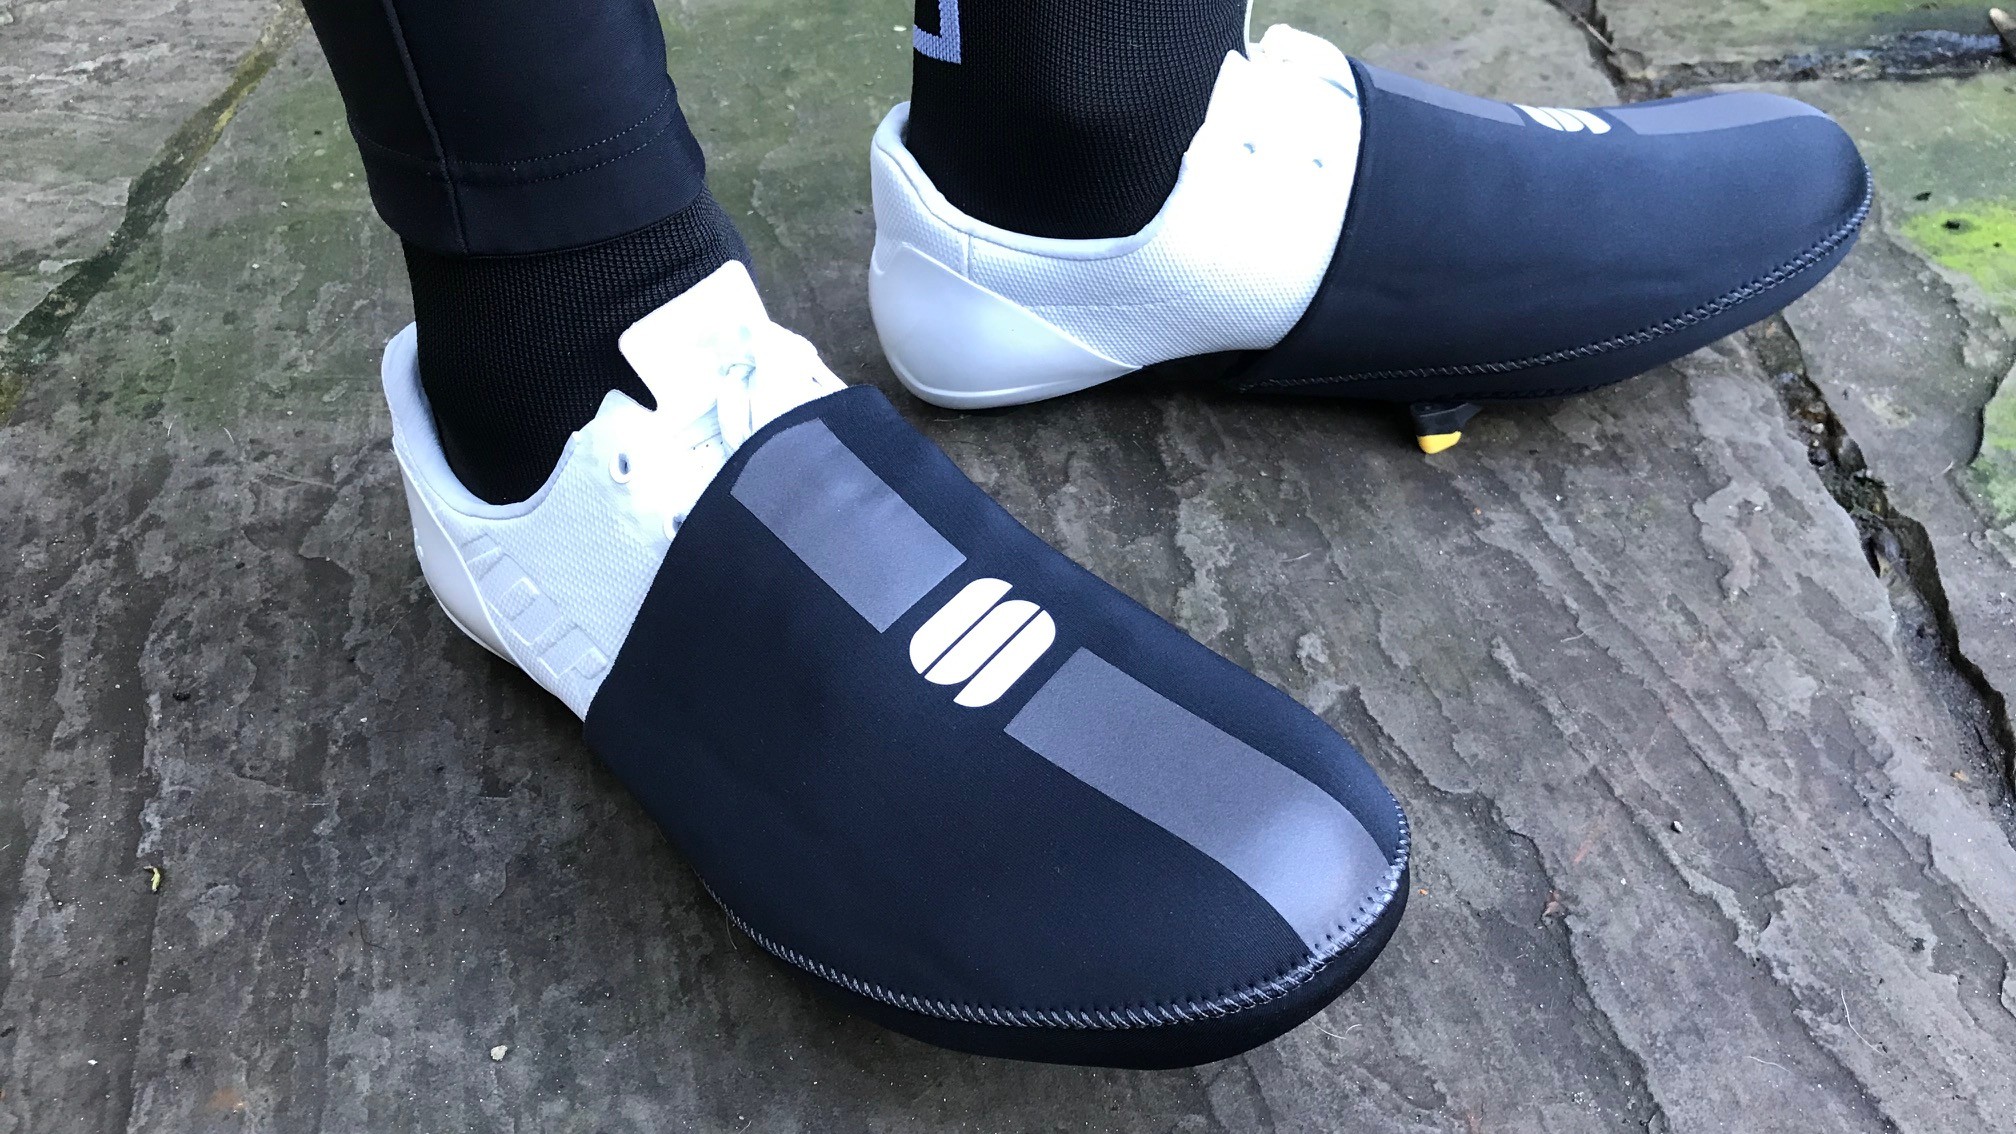 Image shows a rider wearing the Sportful Pro Race toe covers.